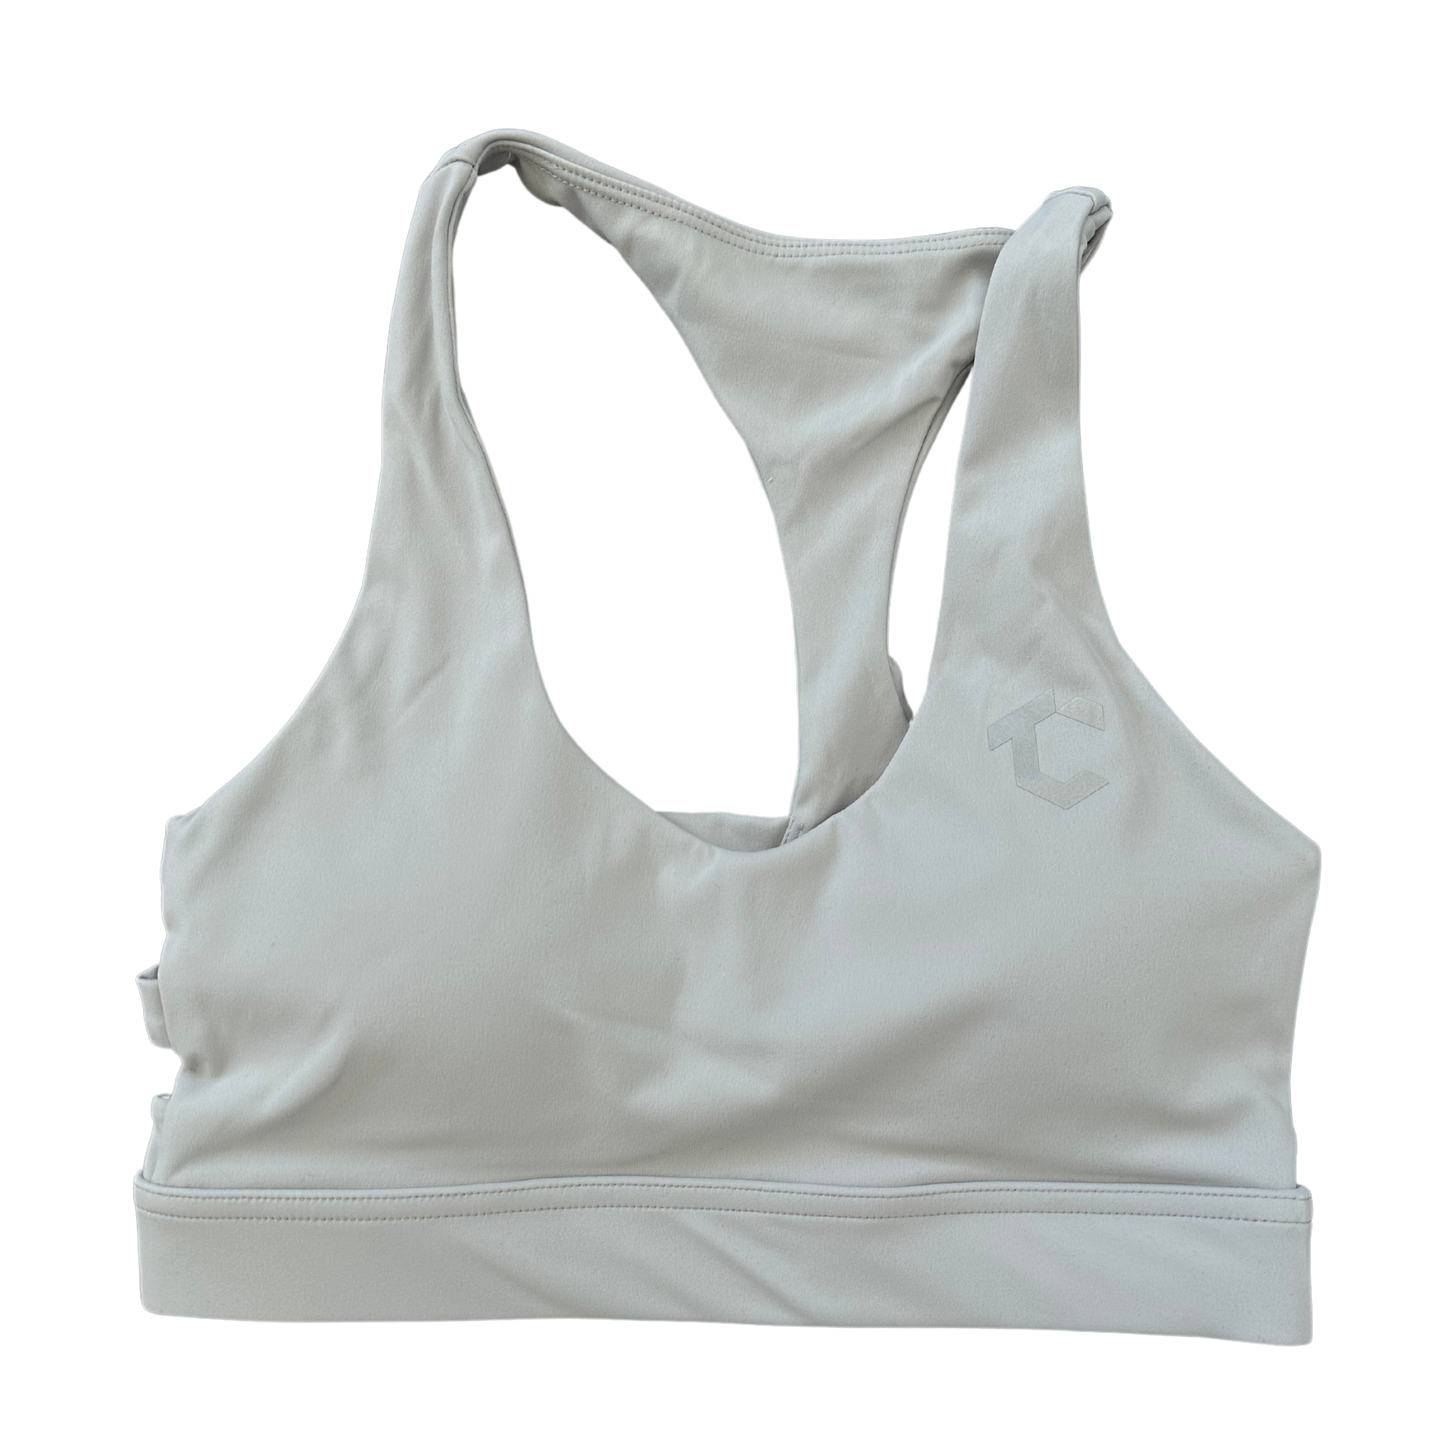 Double Strapped Back Sports Bra - Gray